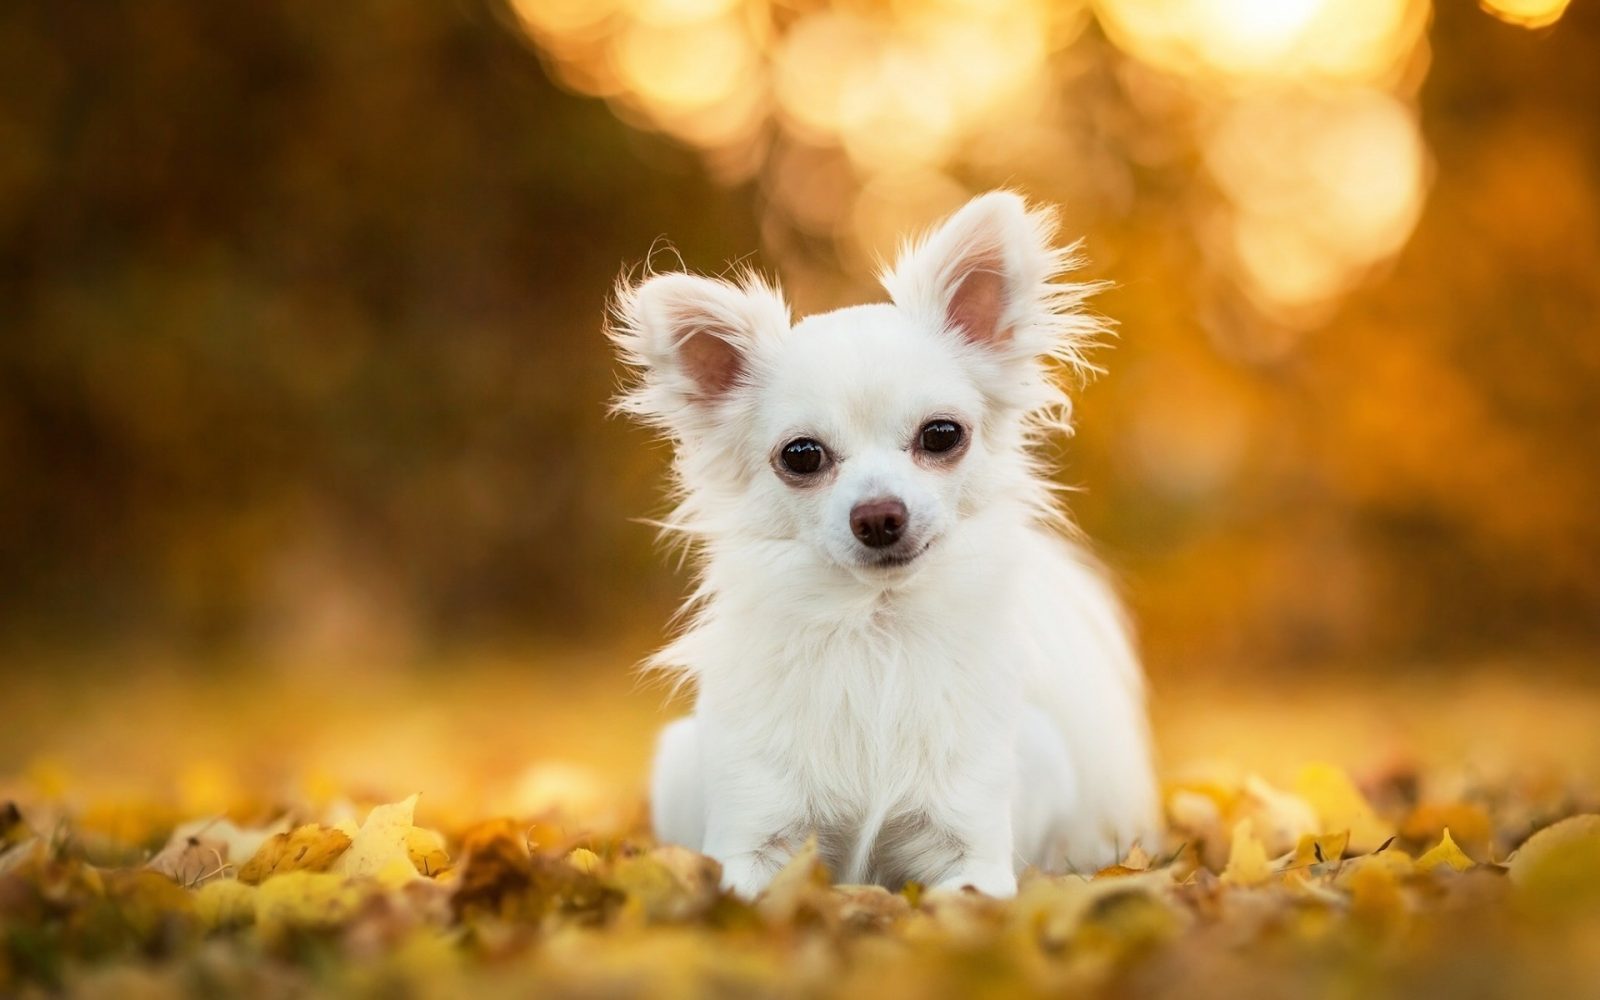 Which Big Dog And Small Dog Are You A Combination Of? 🐶 Quiz Chihuahua